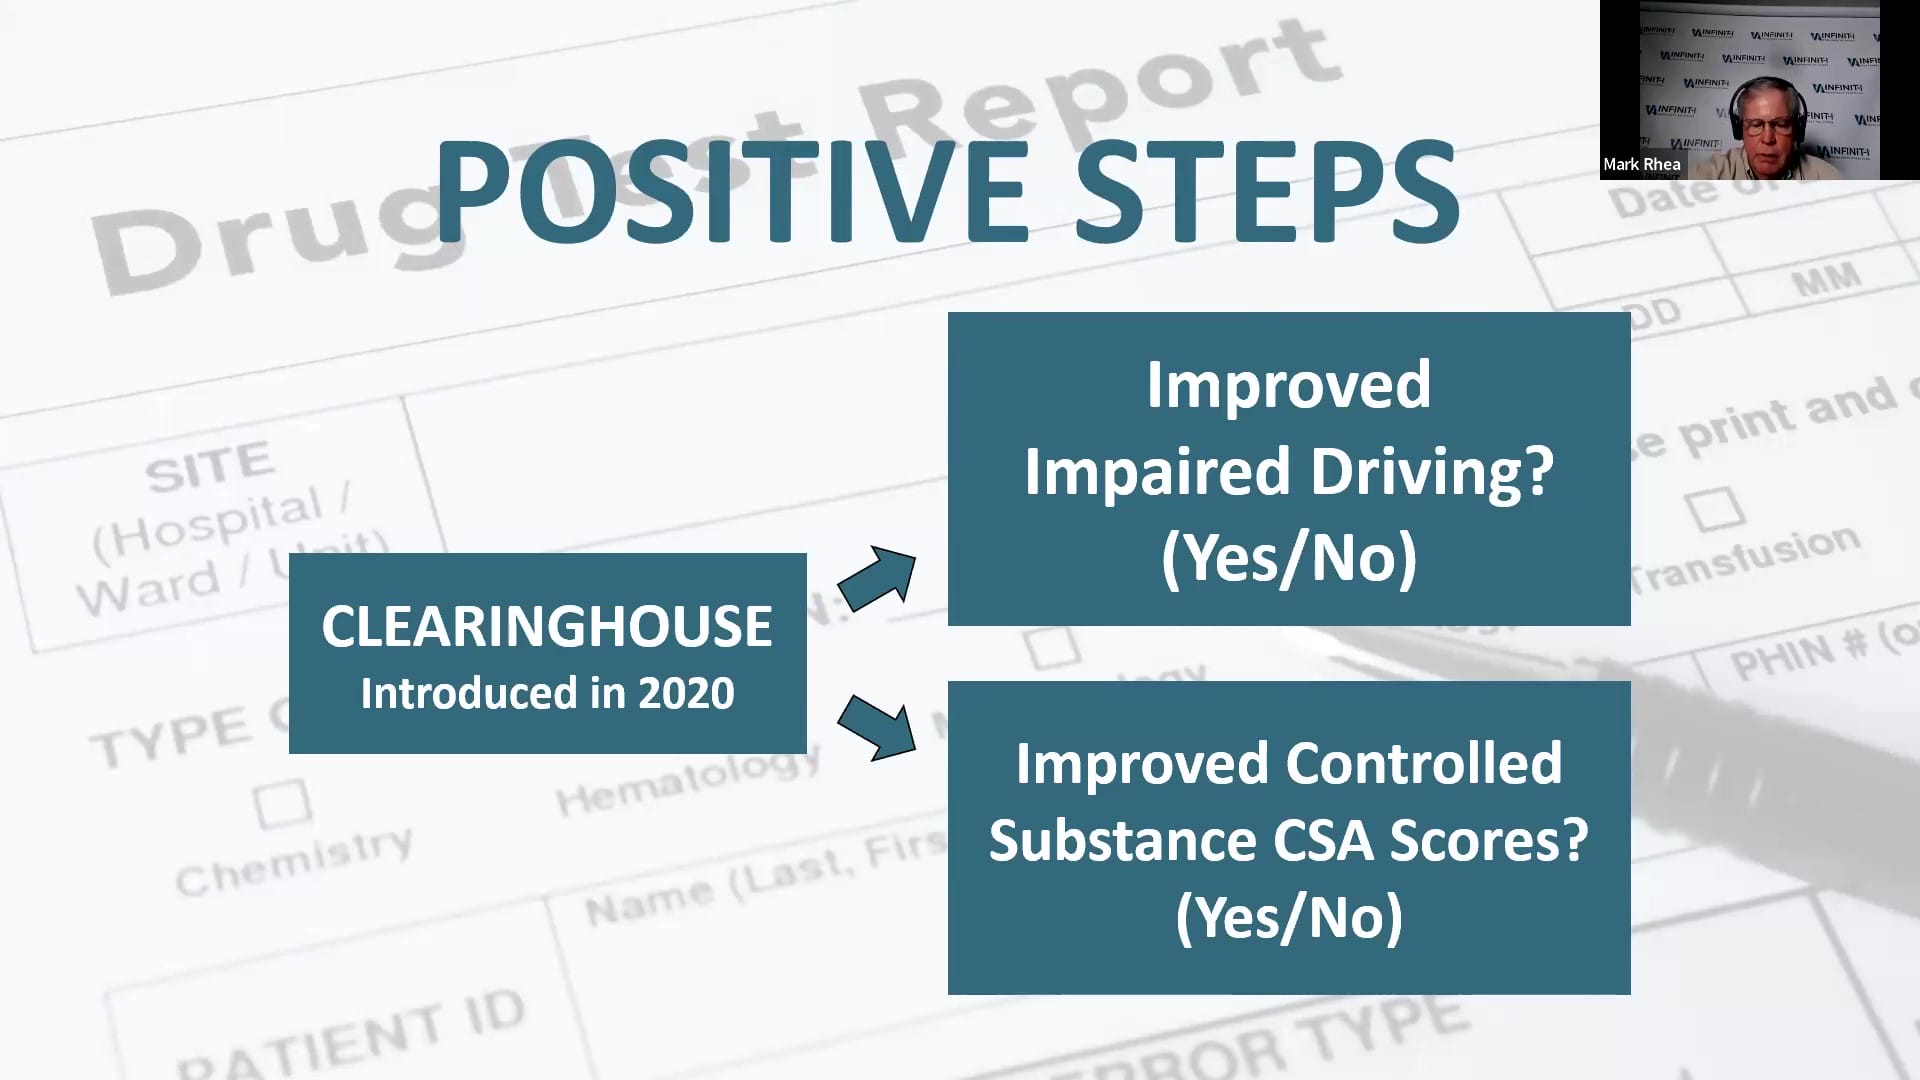 Clearninghouse Impaired Driving Controlled Substance CSA Scores